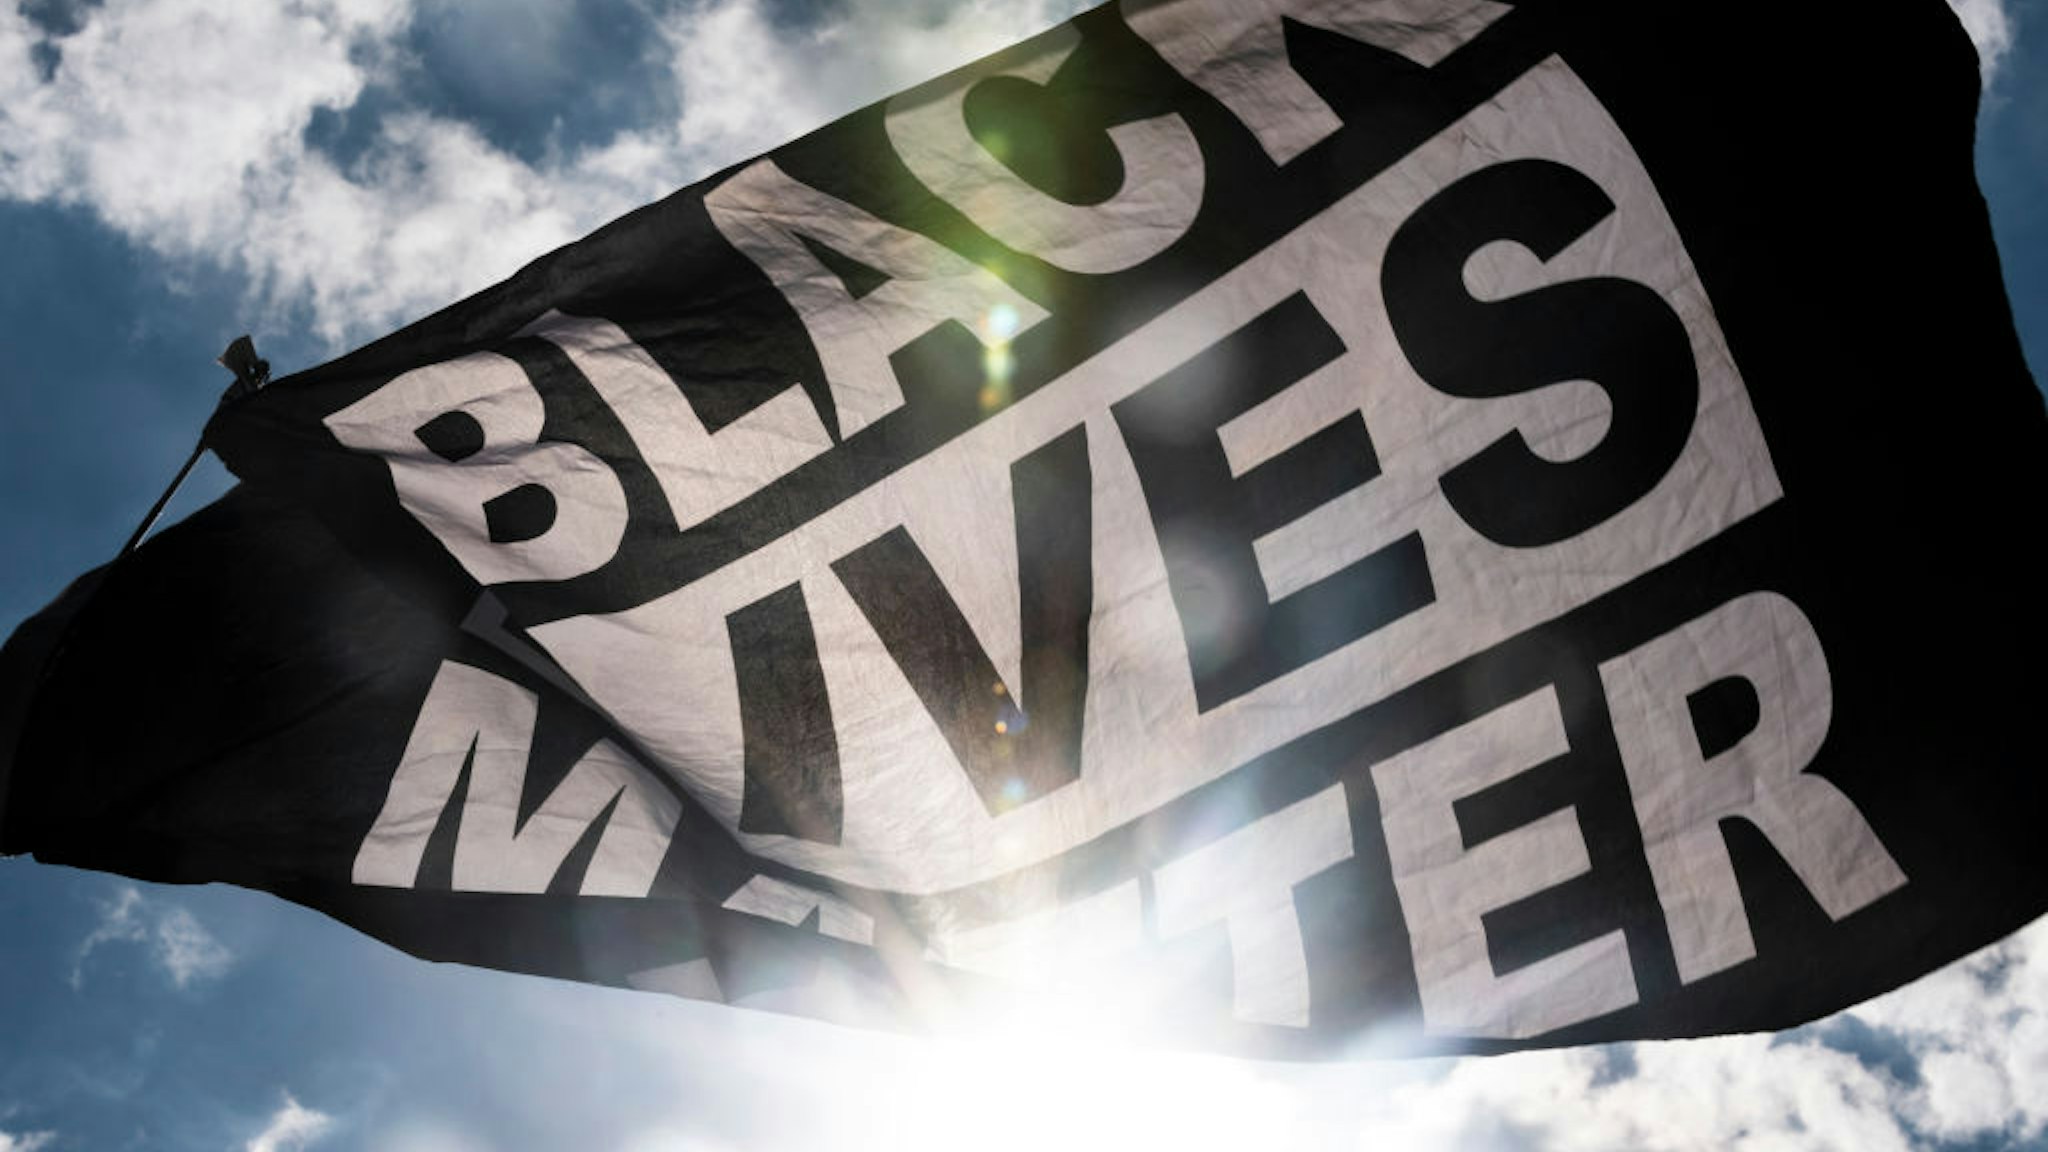 MINNEAPOLIS, MN - JUNE 13: A Black Lives Matter flag waves during a demonstration outside the First Police Precinct Station on June 13, 2020 in Minneapolis, Minnesota. Protests and demonstrations have continued in cities around the world in the wake of George Floyd's death in Minneapolis Police custody on May 25.